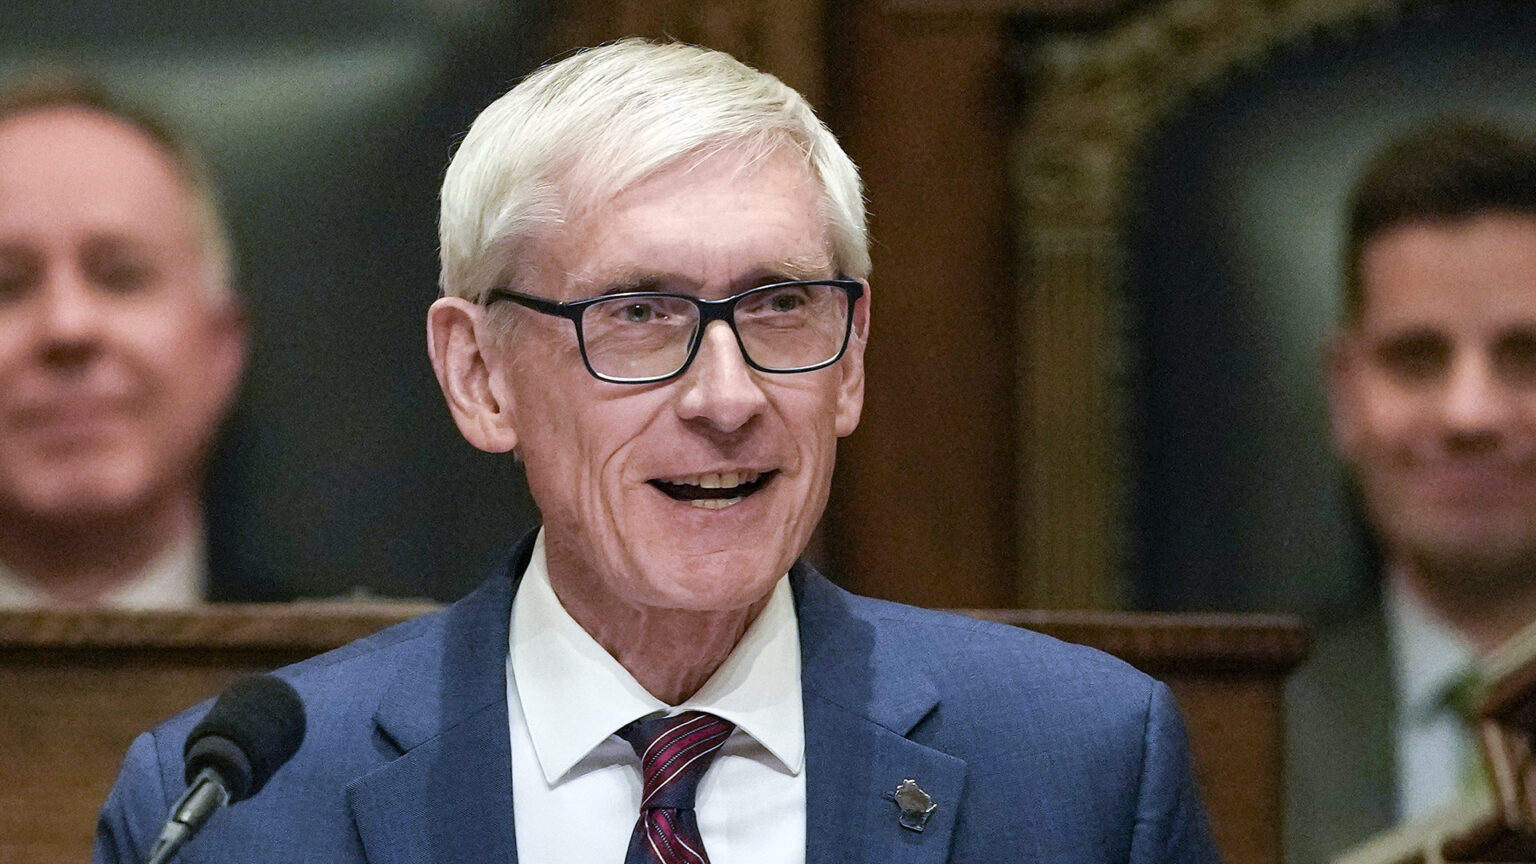 Tony Evers stands and speaks into a microphone, with an out-of-focus Robin Vos and Chris Kapenga seated in high-backed wood and leather chairs on a higher level of a legislative dais in the background.